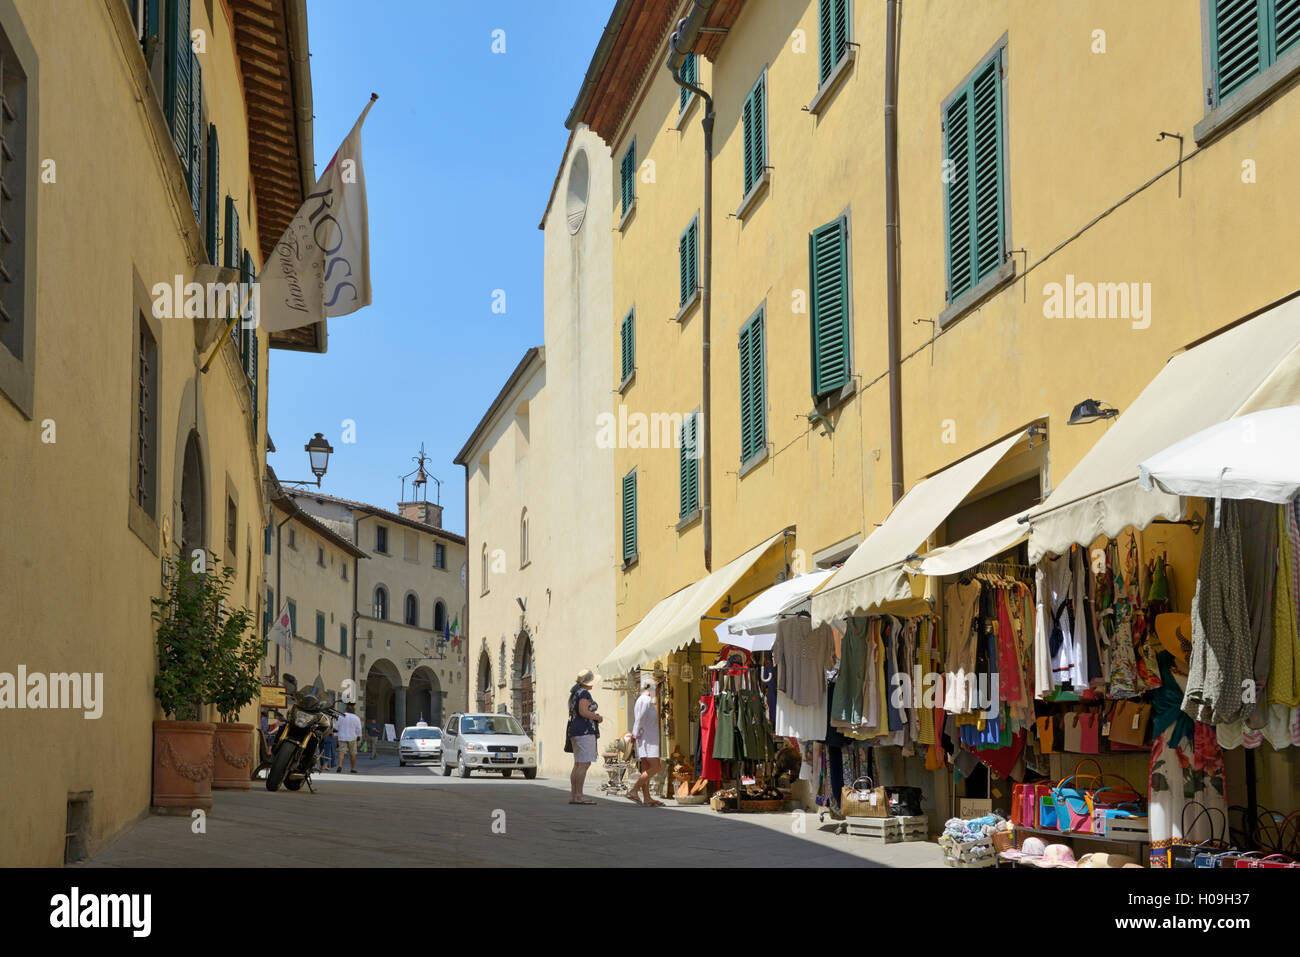 Shops in the centre of the old town, Radda in Chianti, Tuscany, Italy, Europe Stock Photo